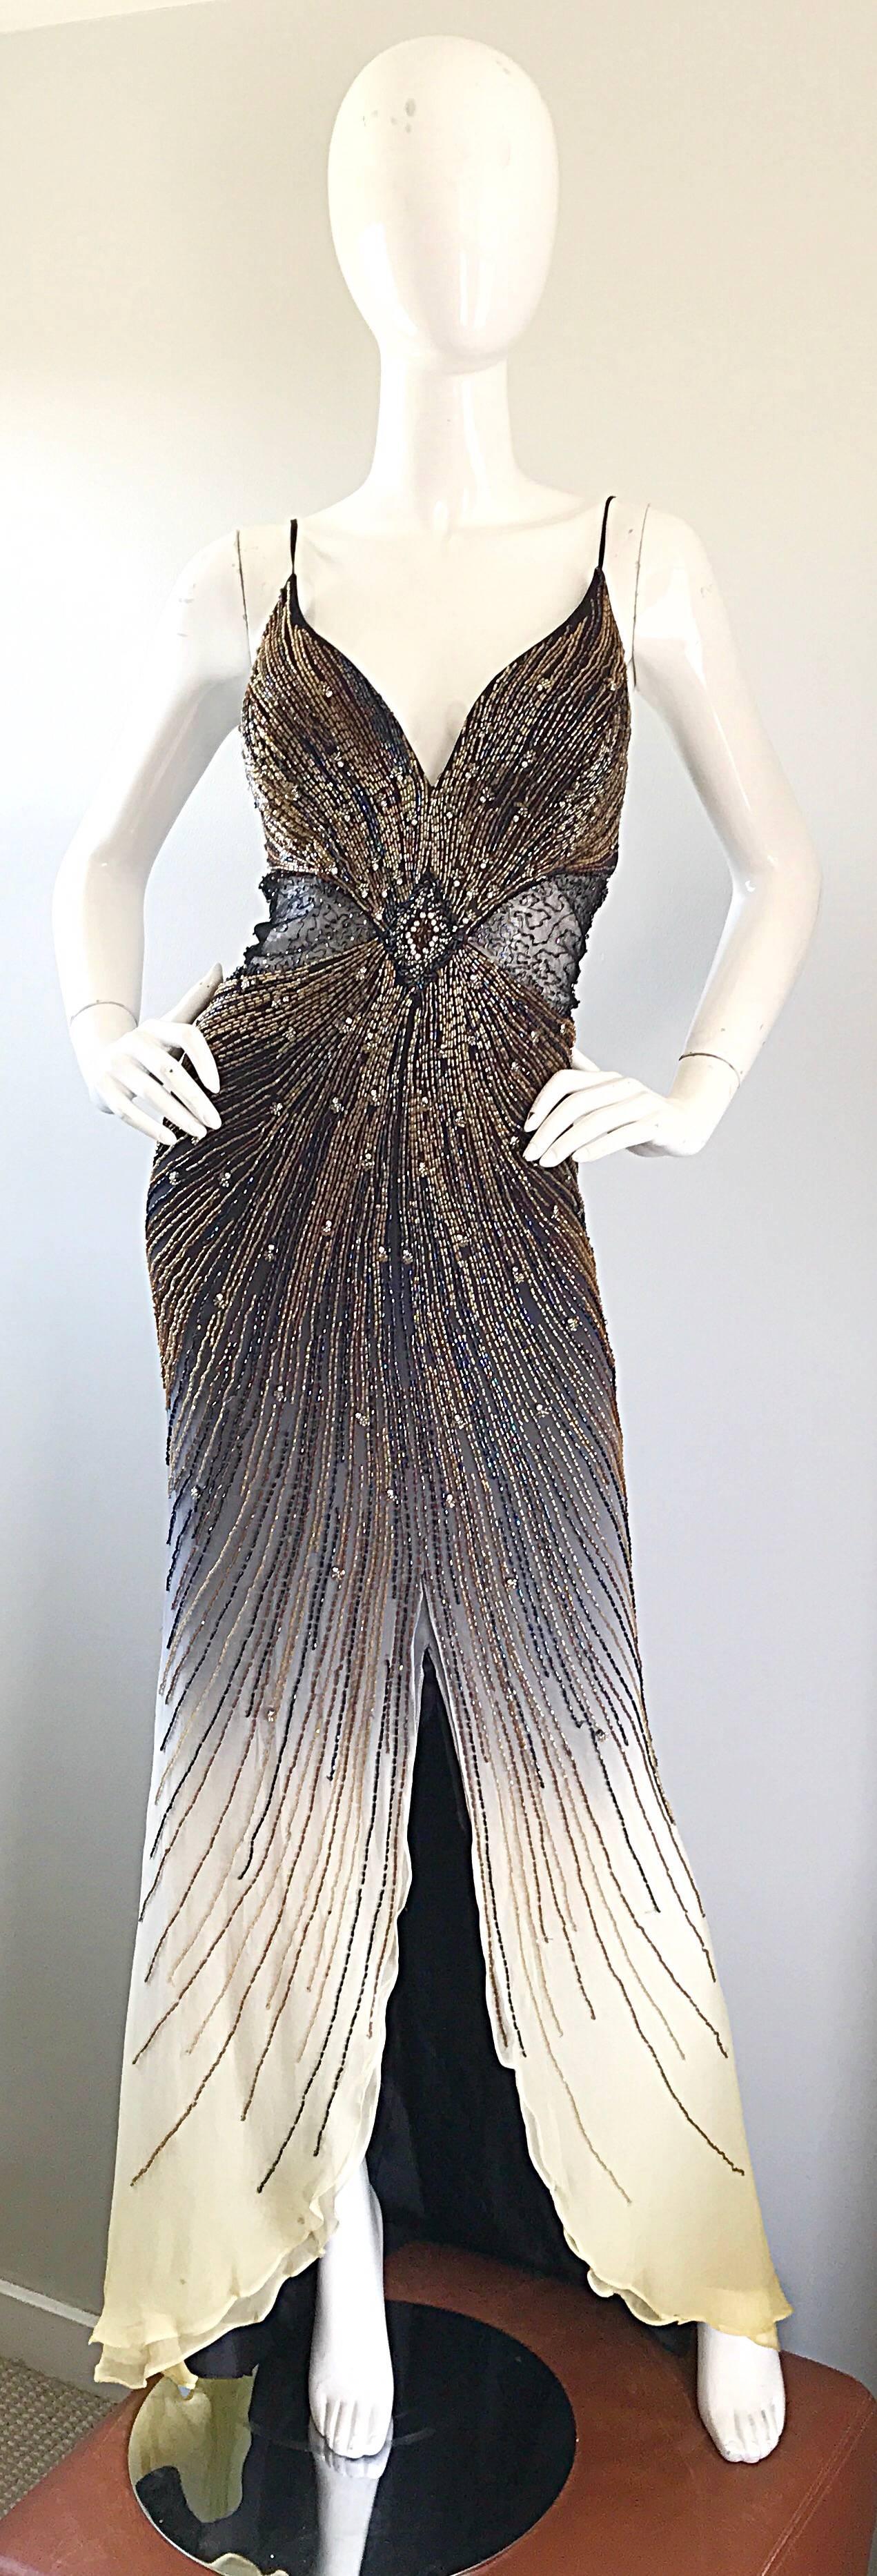 Sexy 1990s black and nude / tan ombre chiffon evening dress! Features cut-out panels at each side of the waist, with mesh panels covering. Thousands of beads and sequins hand-sewn throughout. Dramatic train. Hidden zipper up the back, with